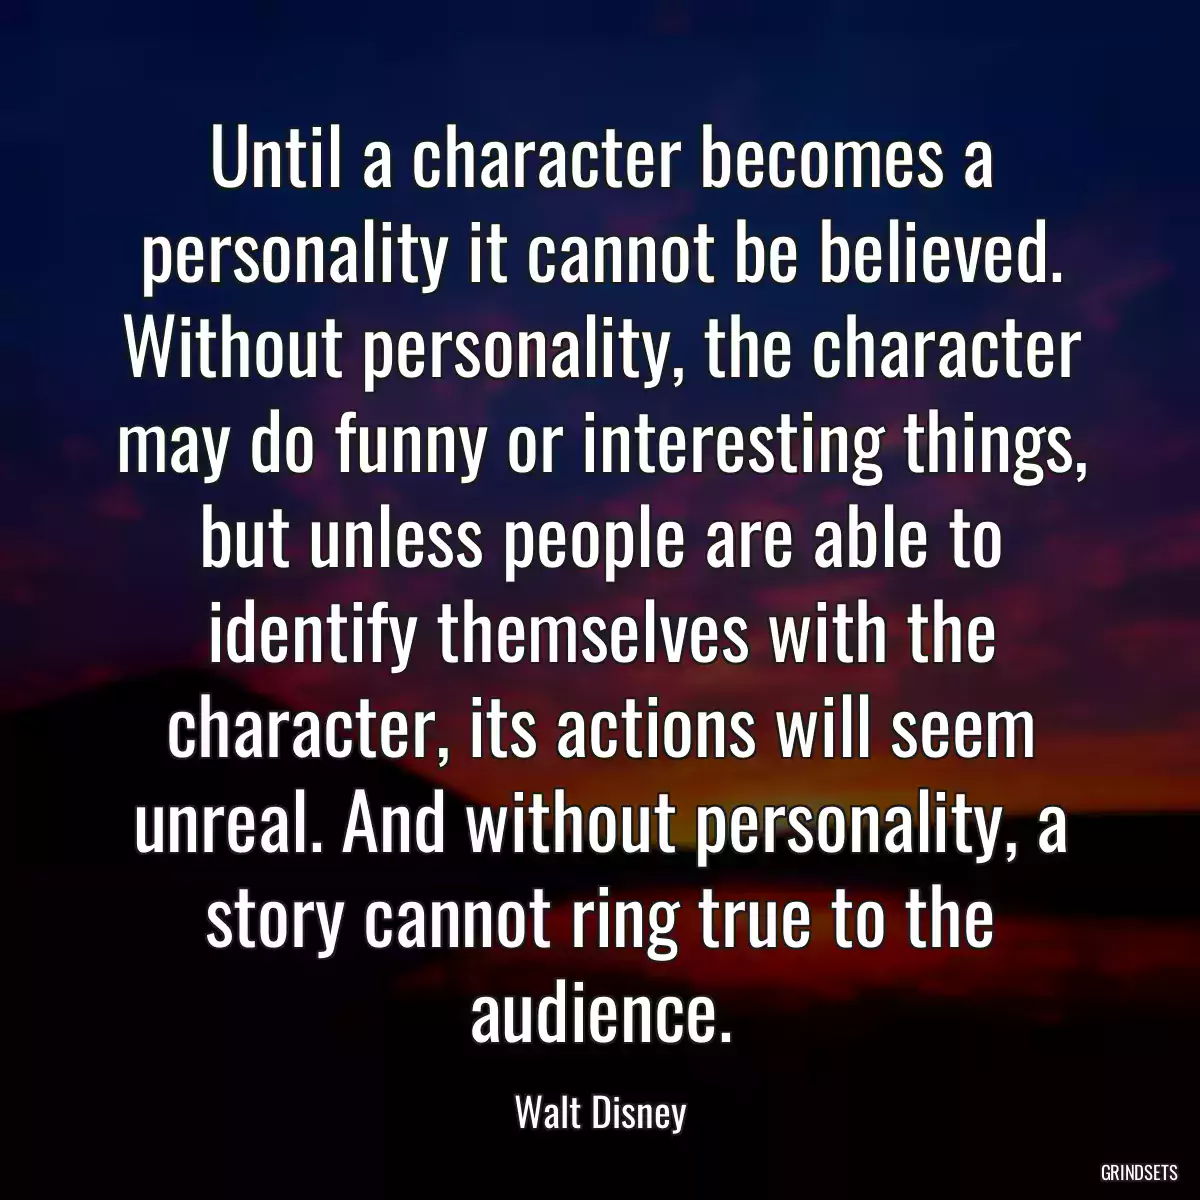 Until a character becomes a personality it cannot be believed. Without personality, the character may do funny or interesting things, but unless people are able to identify themselves with the character, its actions will seem unreal. And without personality, a story cannot ring true to the audience.